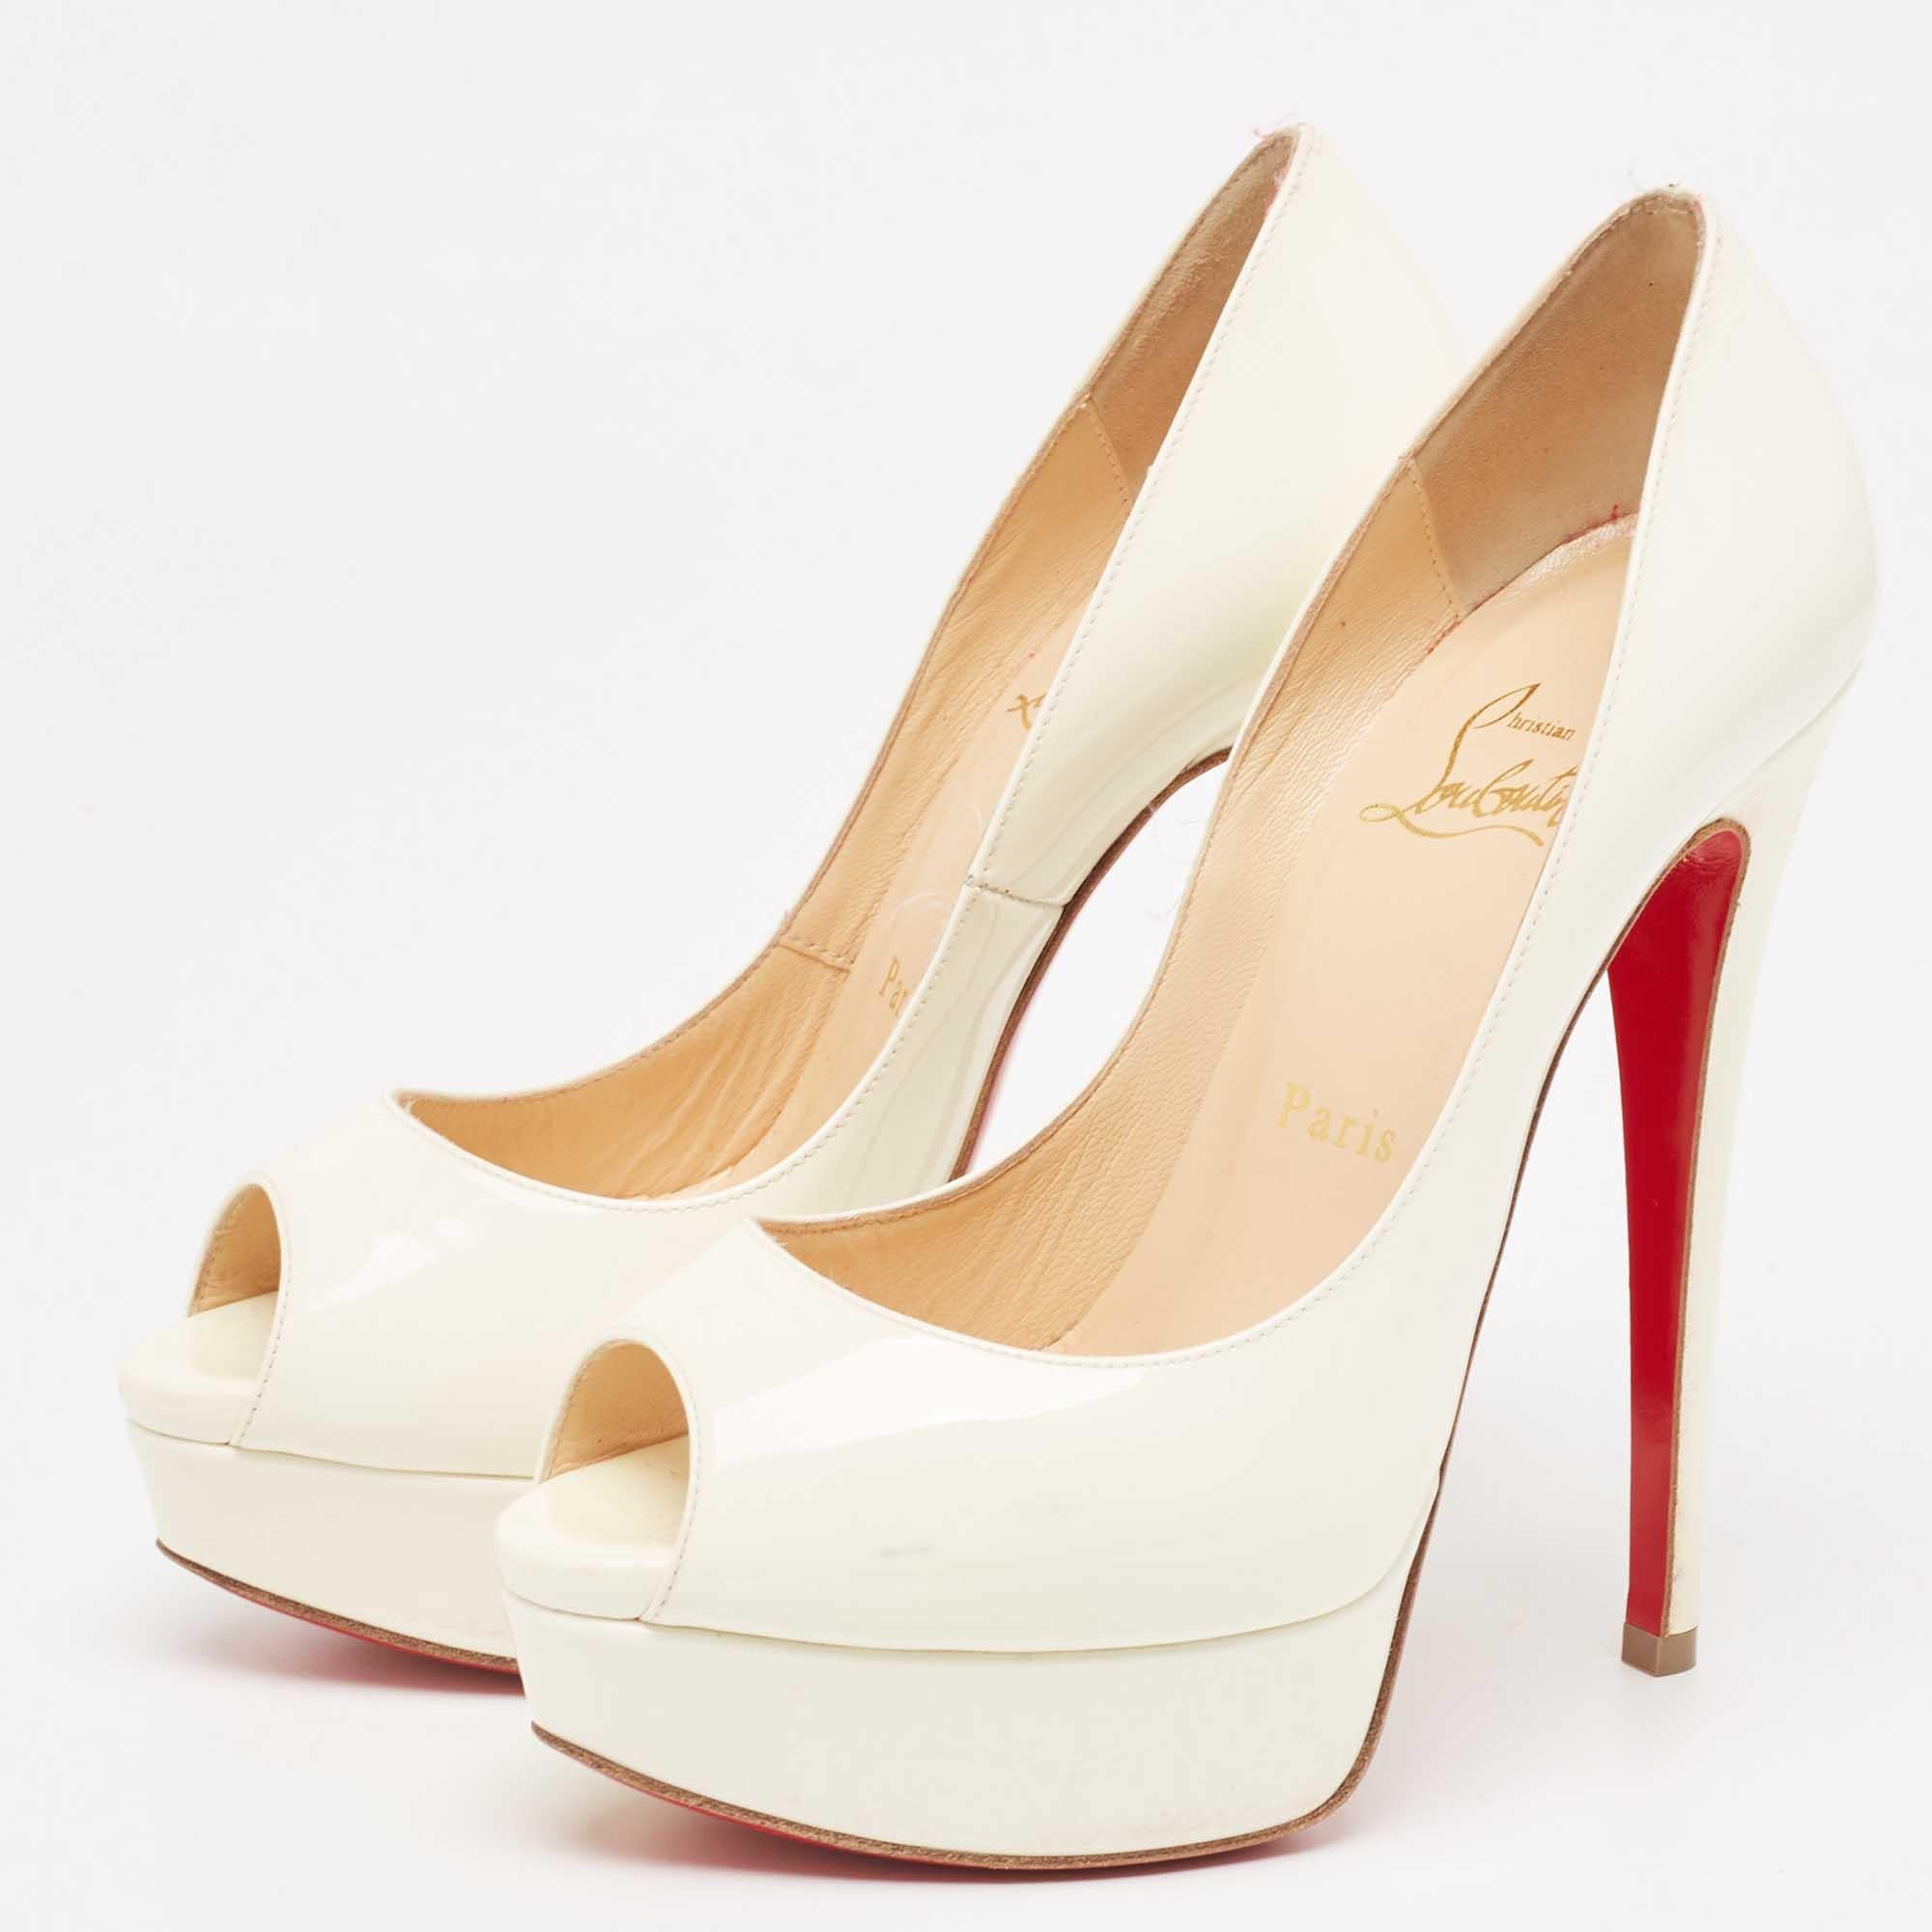 Christian Louboutin Cream Patent Lady Peep Pumps Size 36 For Sale 4